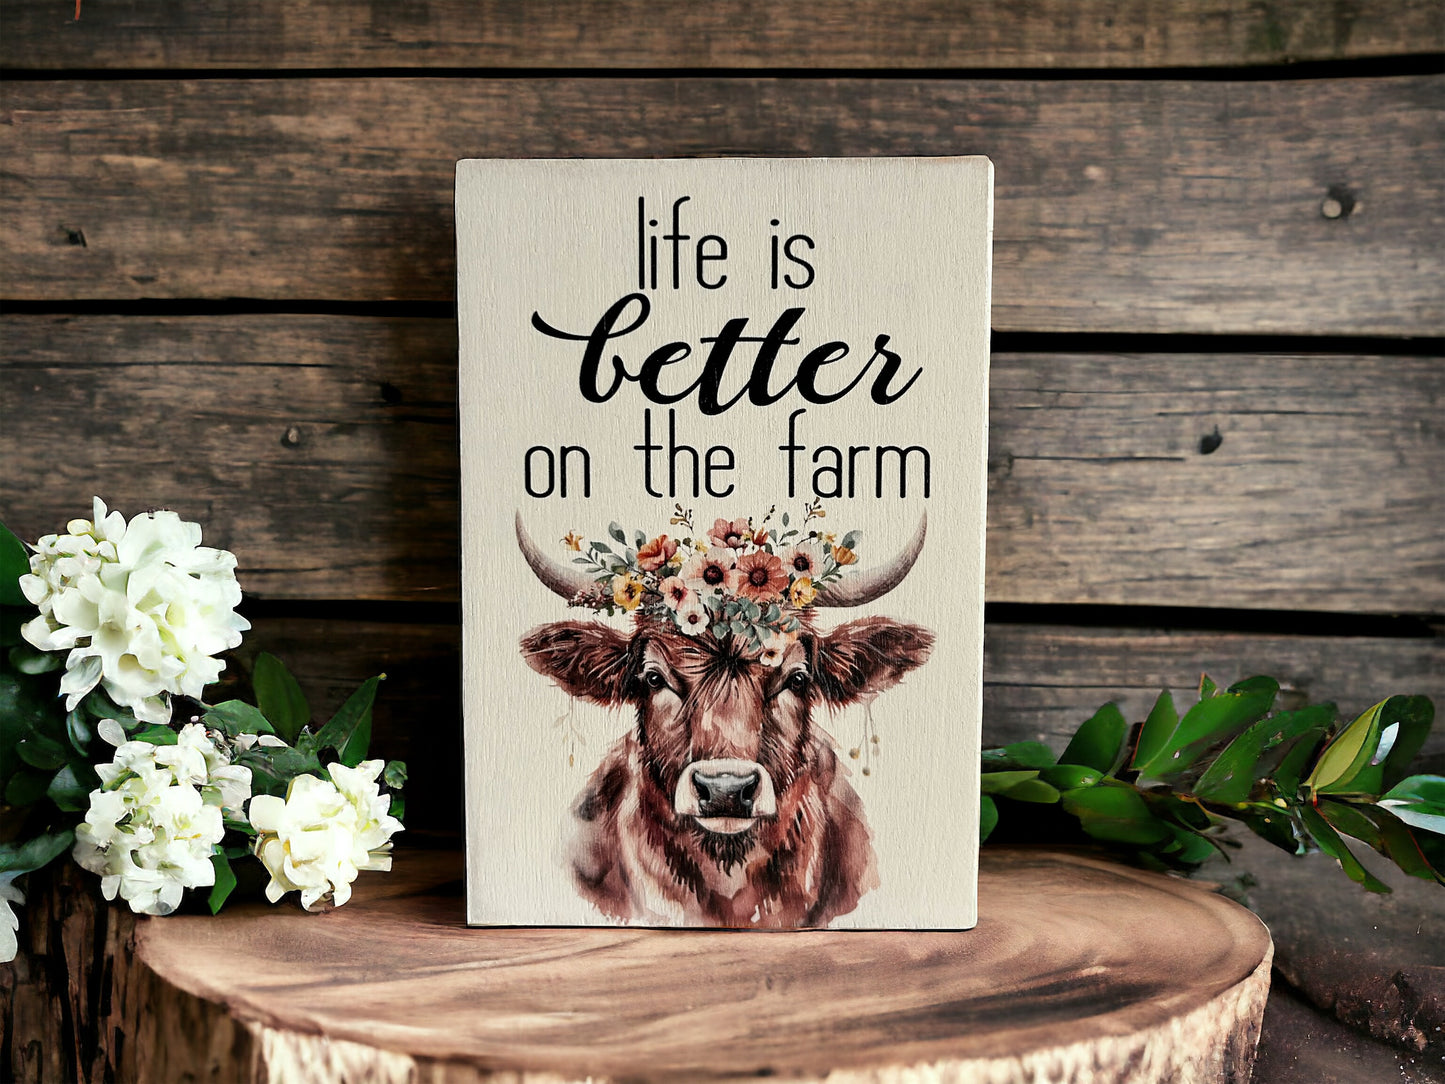 Life is Better on the Farm - Rustic Wood Country Sign